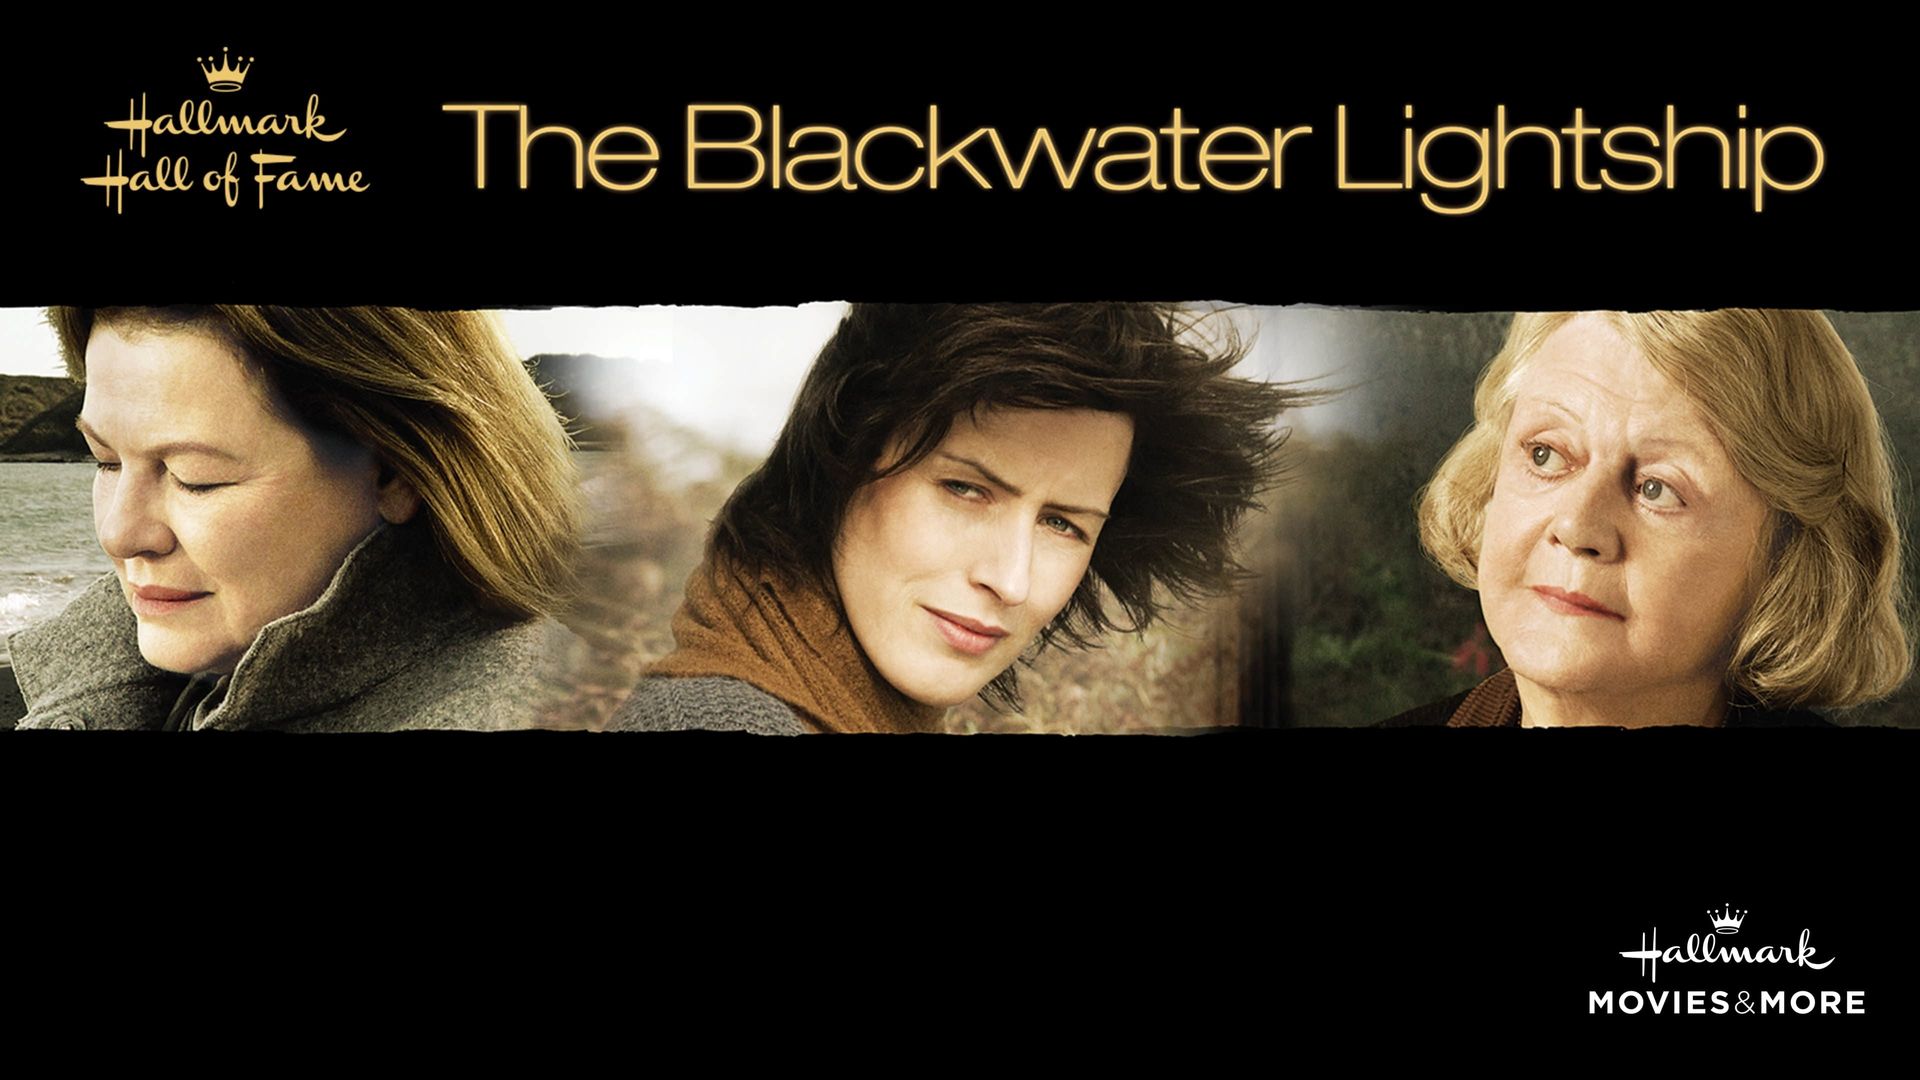 The Blackwater Lightship background